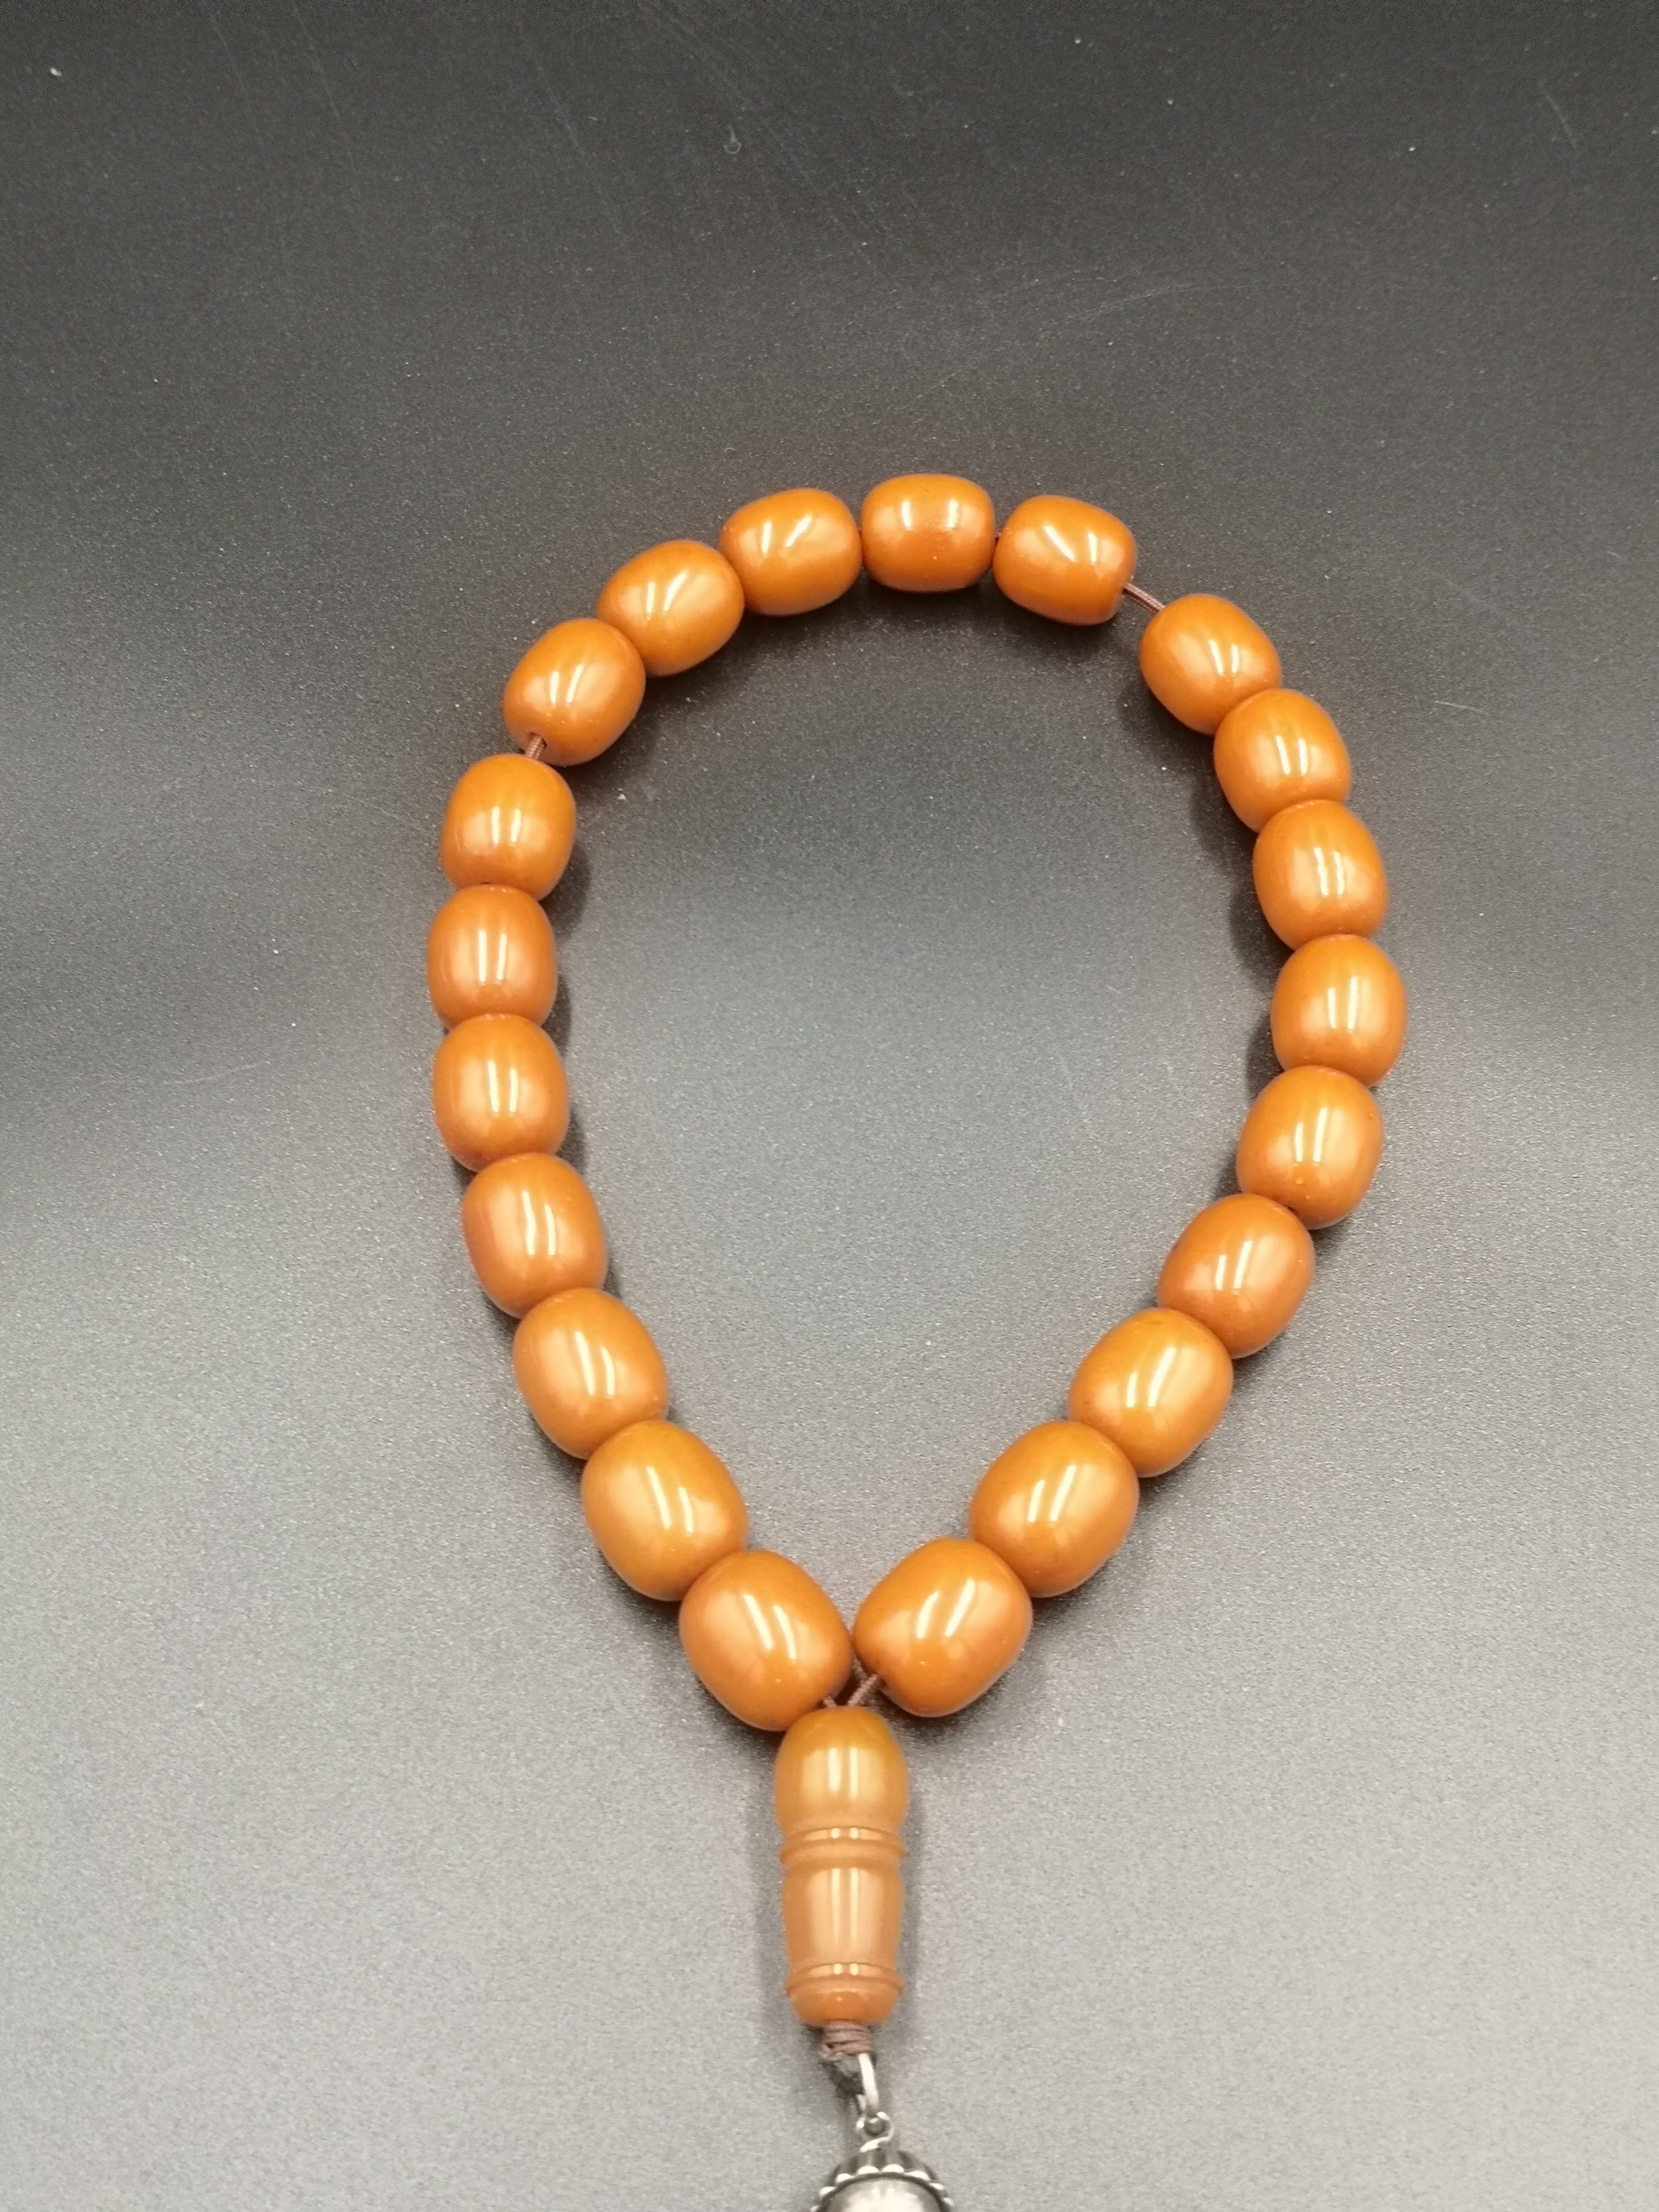 Formed natural butterscotch worry beads - Image 2 of 4